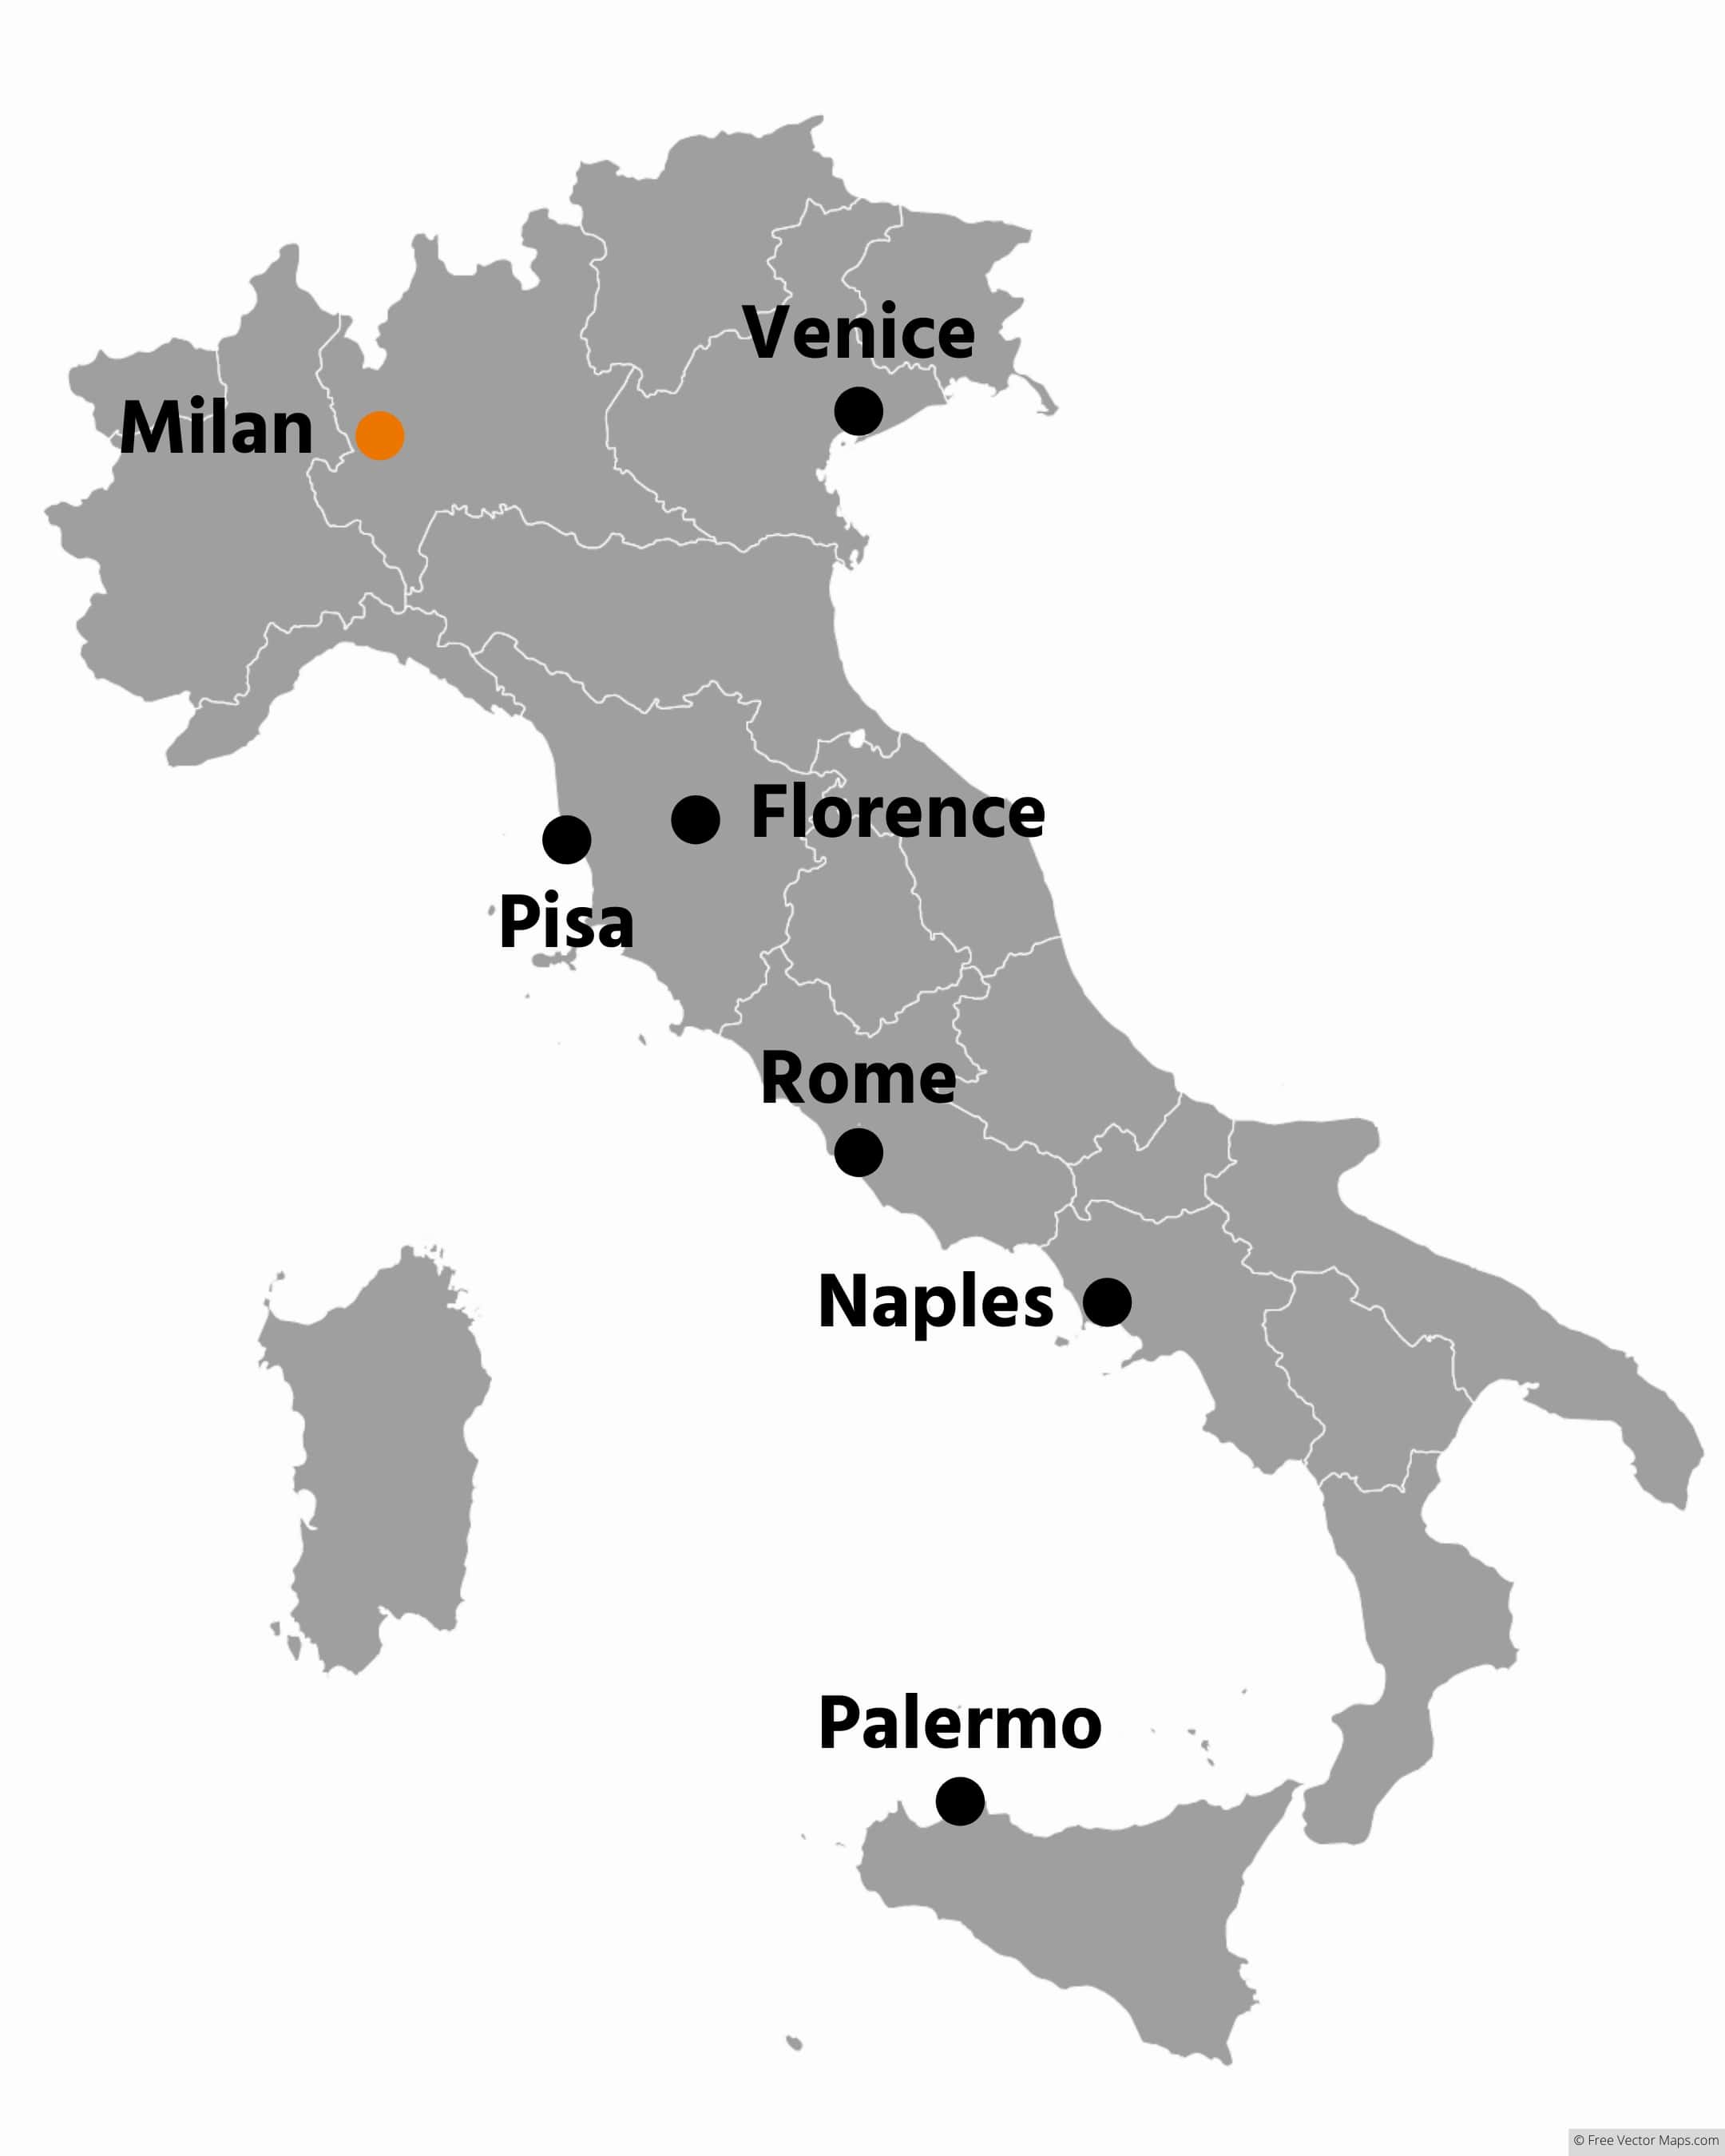 milan on the map of italy